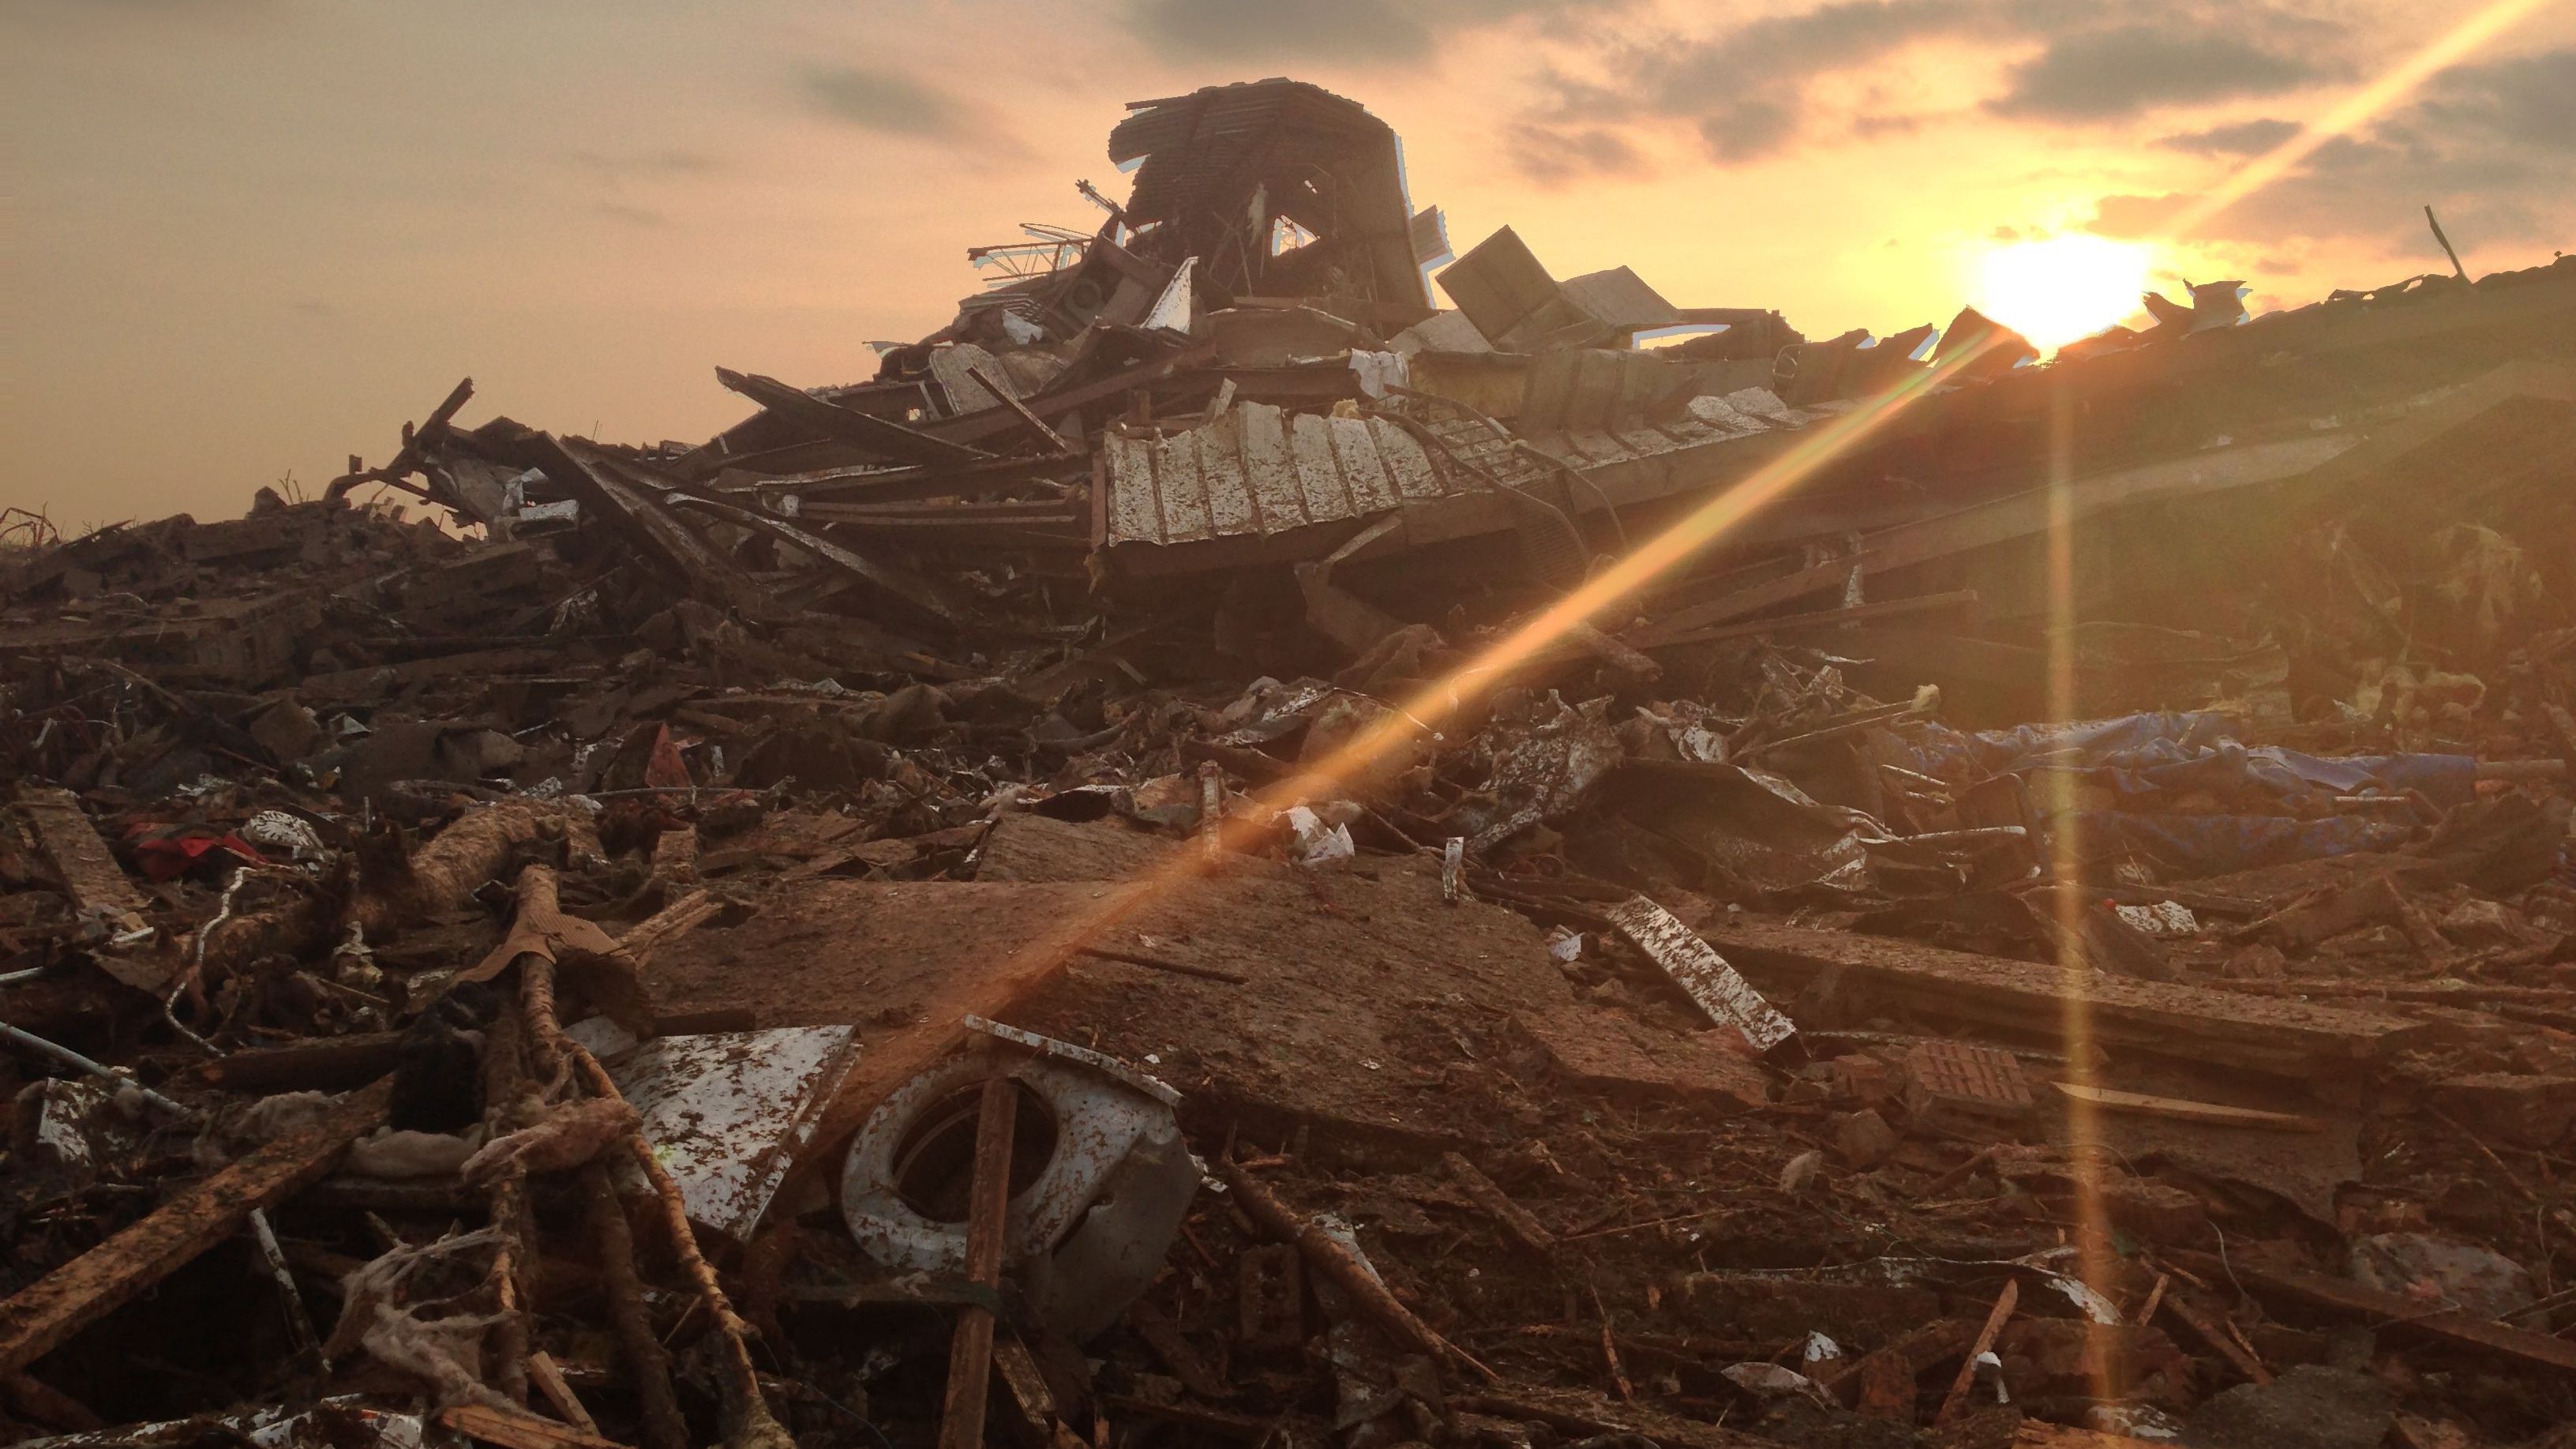 A first responder captured this photo at the scene of the devastated Plaza Elementary School in Moore, Oklahoma.